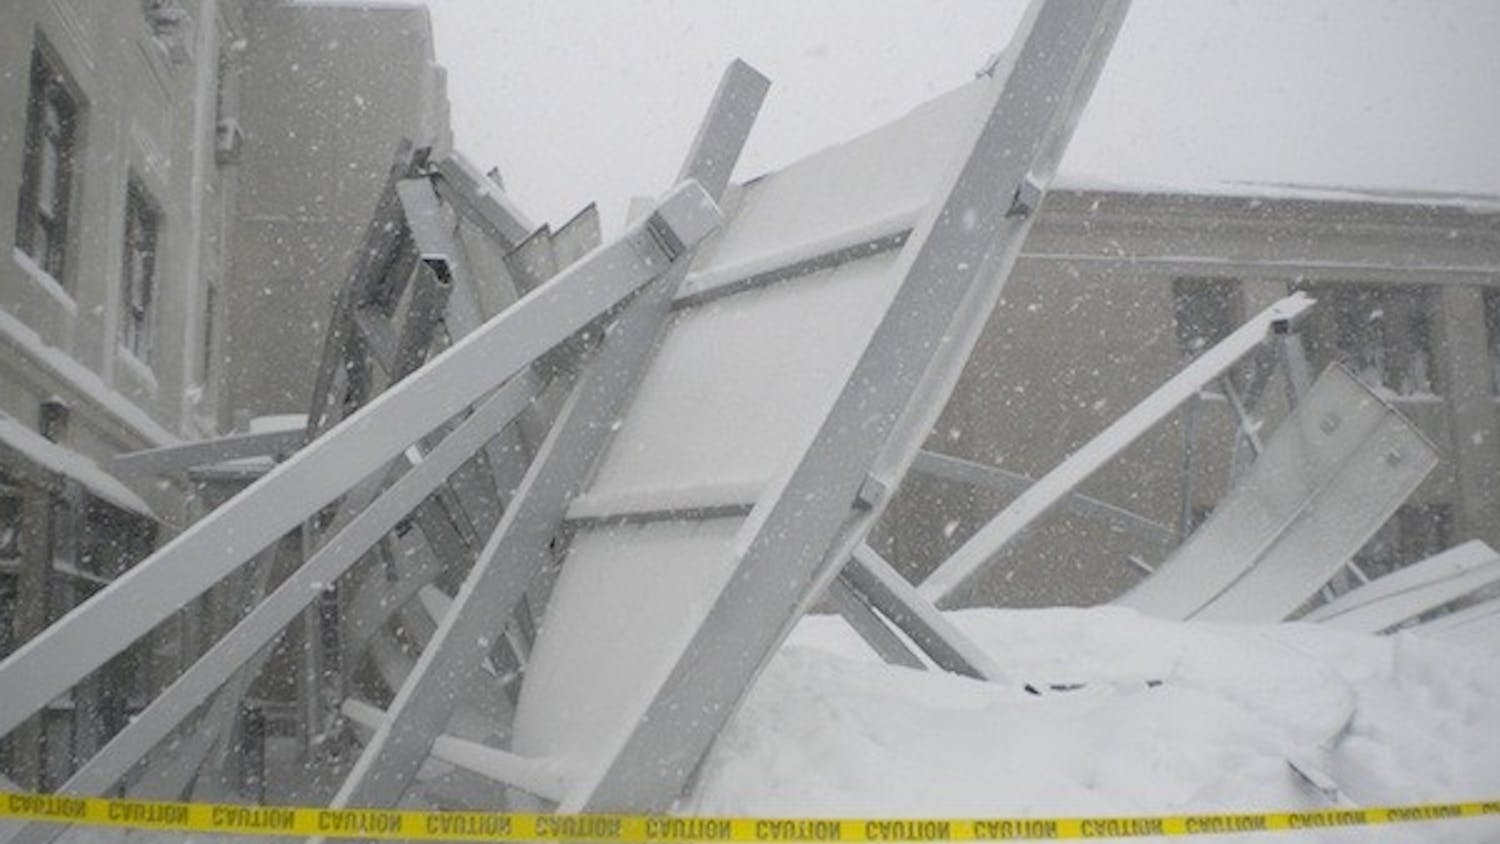 UNDER PRESSURE â€” The recently-built canopy between Mary Graydon Center and the Battelle-Tompkins building collapsed Wednesday under the weight of last weekâ€™s two snowstorms. No injuries were reported.